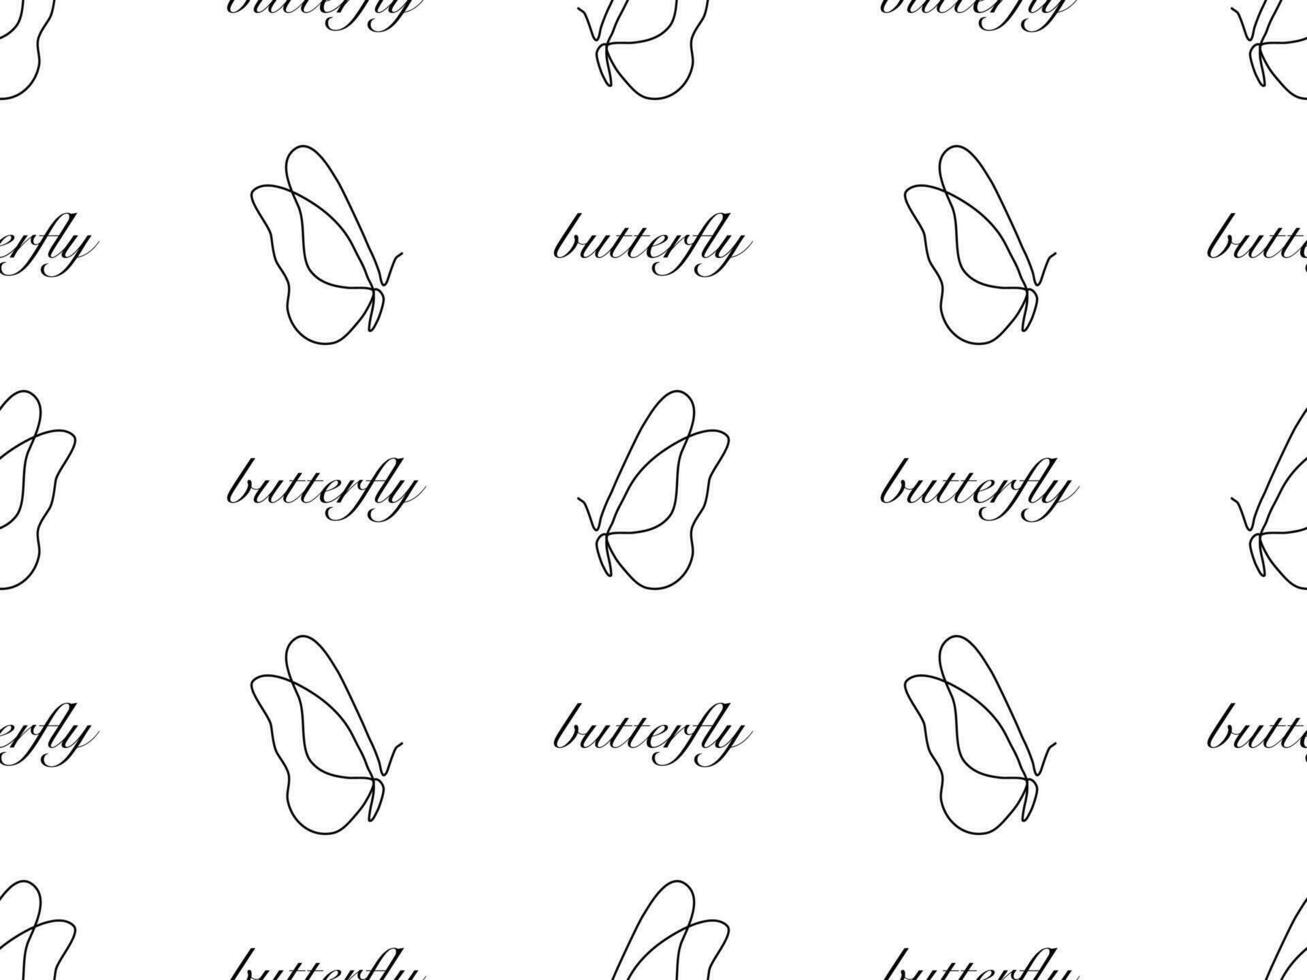 Butterfly cartoon character seamless pattern on white background vector